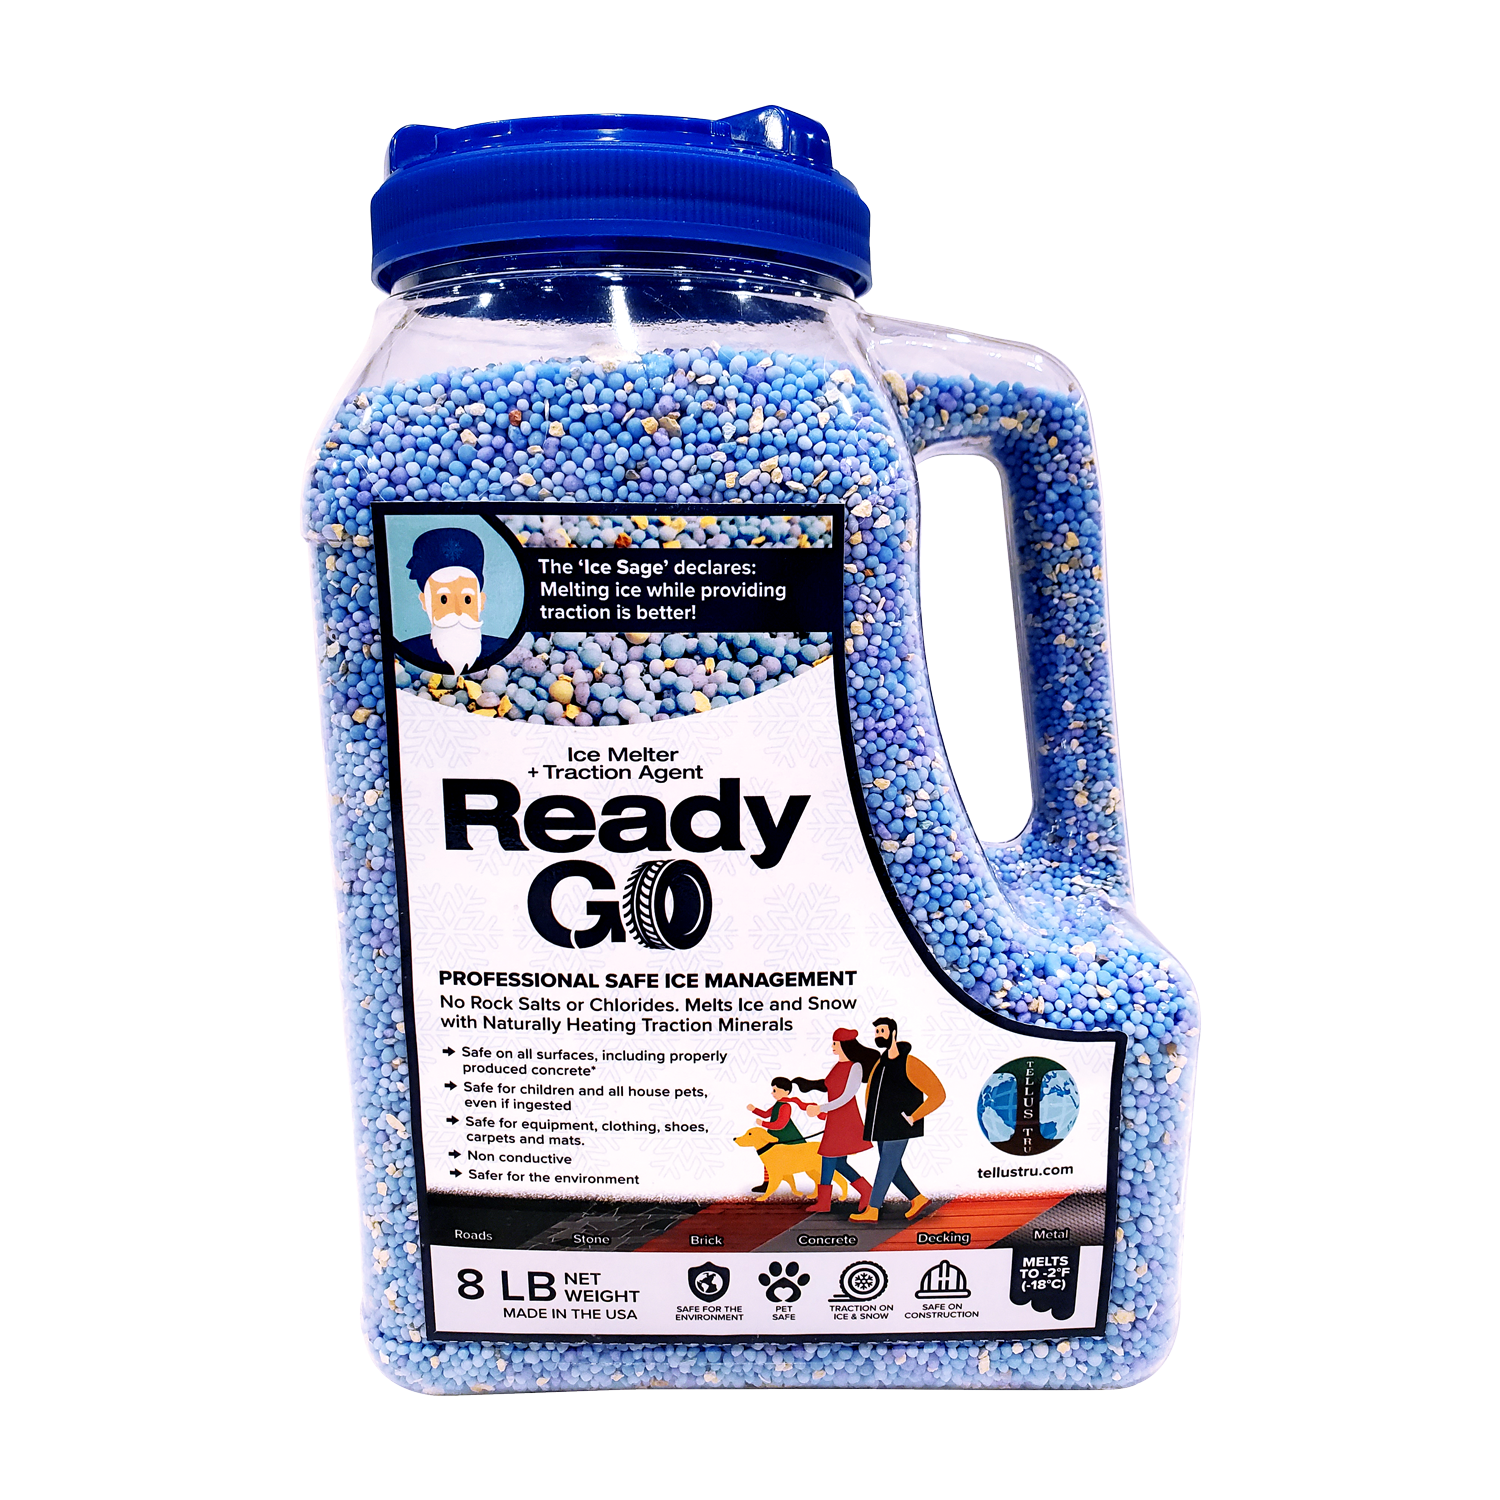 Ready Go Ice Melter is the best Ice Melter for Traction and Safety